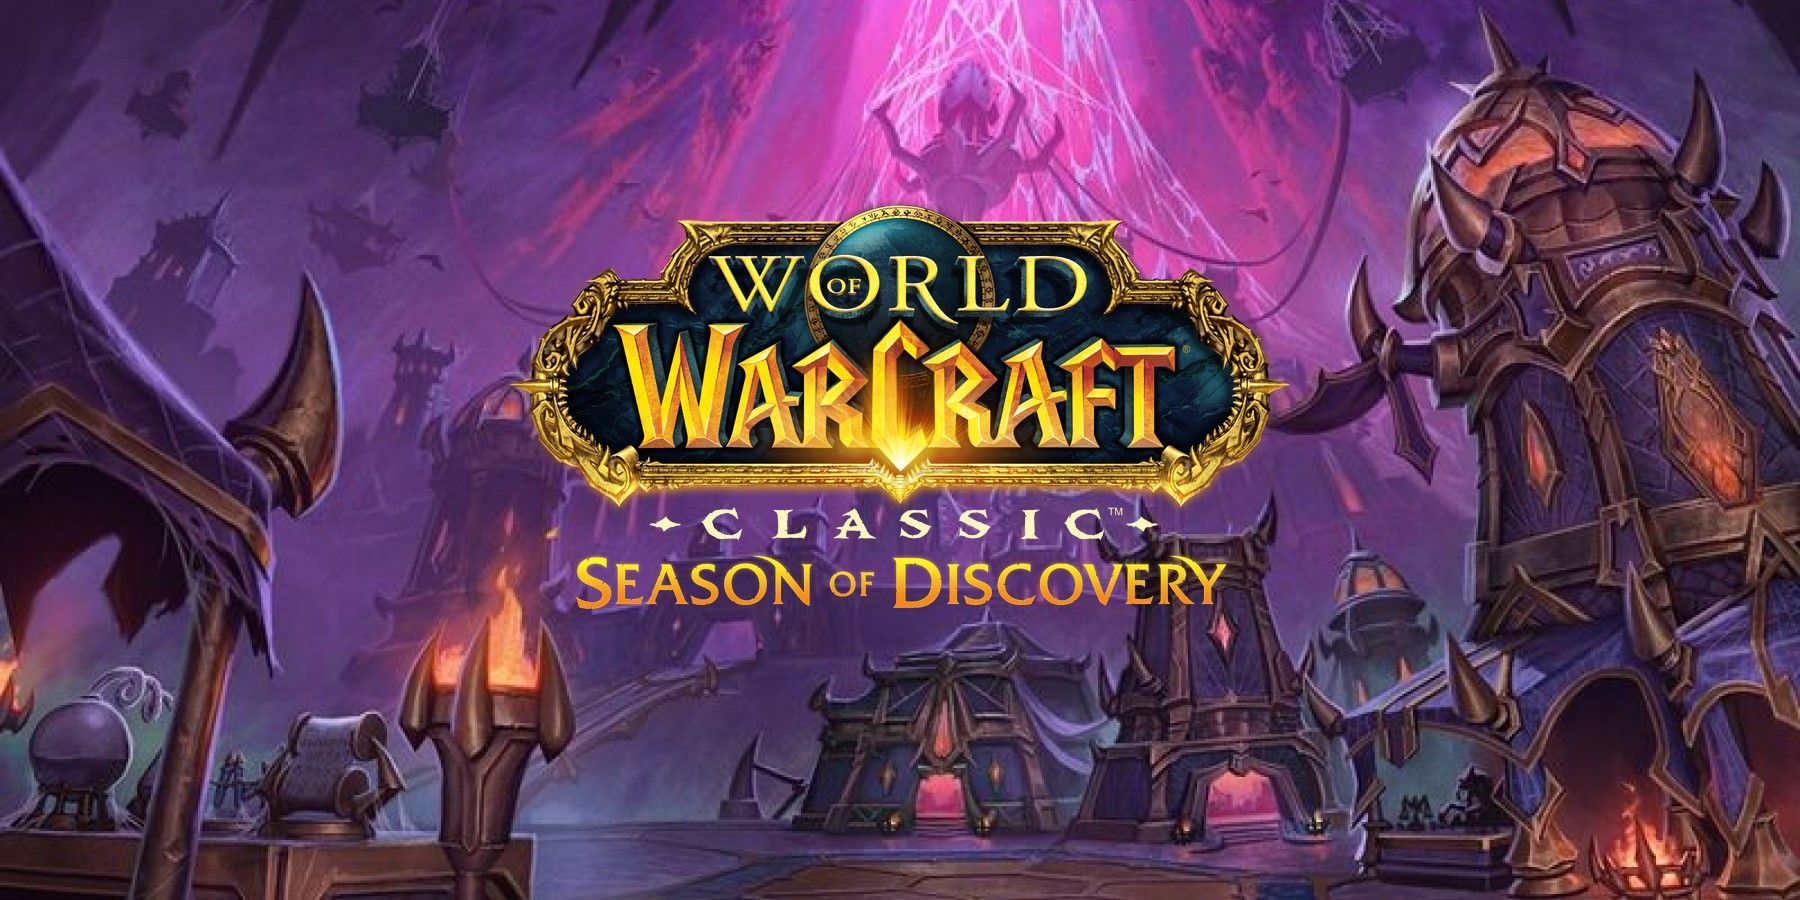 World of Warcraft Boss Drops an Overpowered Weapon in Season of Discovery